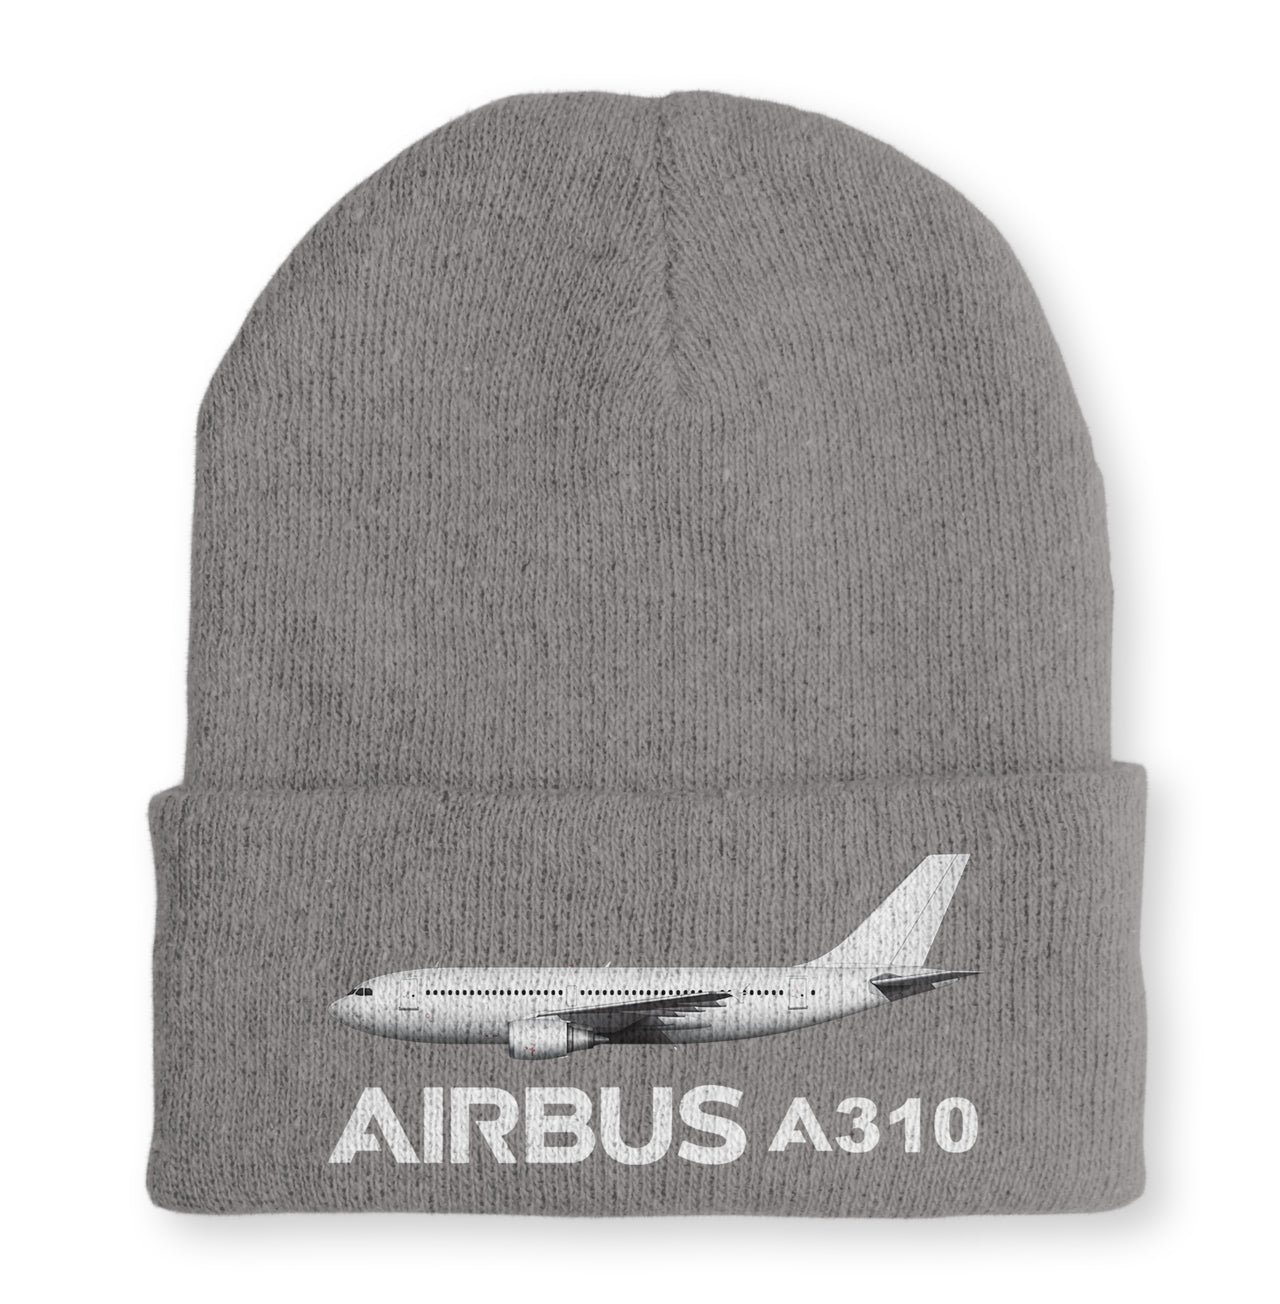 The Airbus A310 Embroidered Beanies